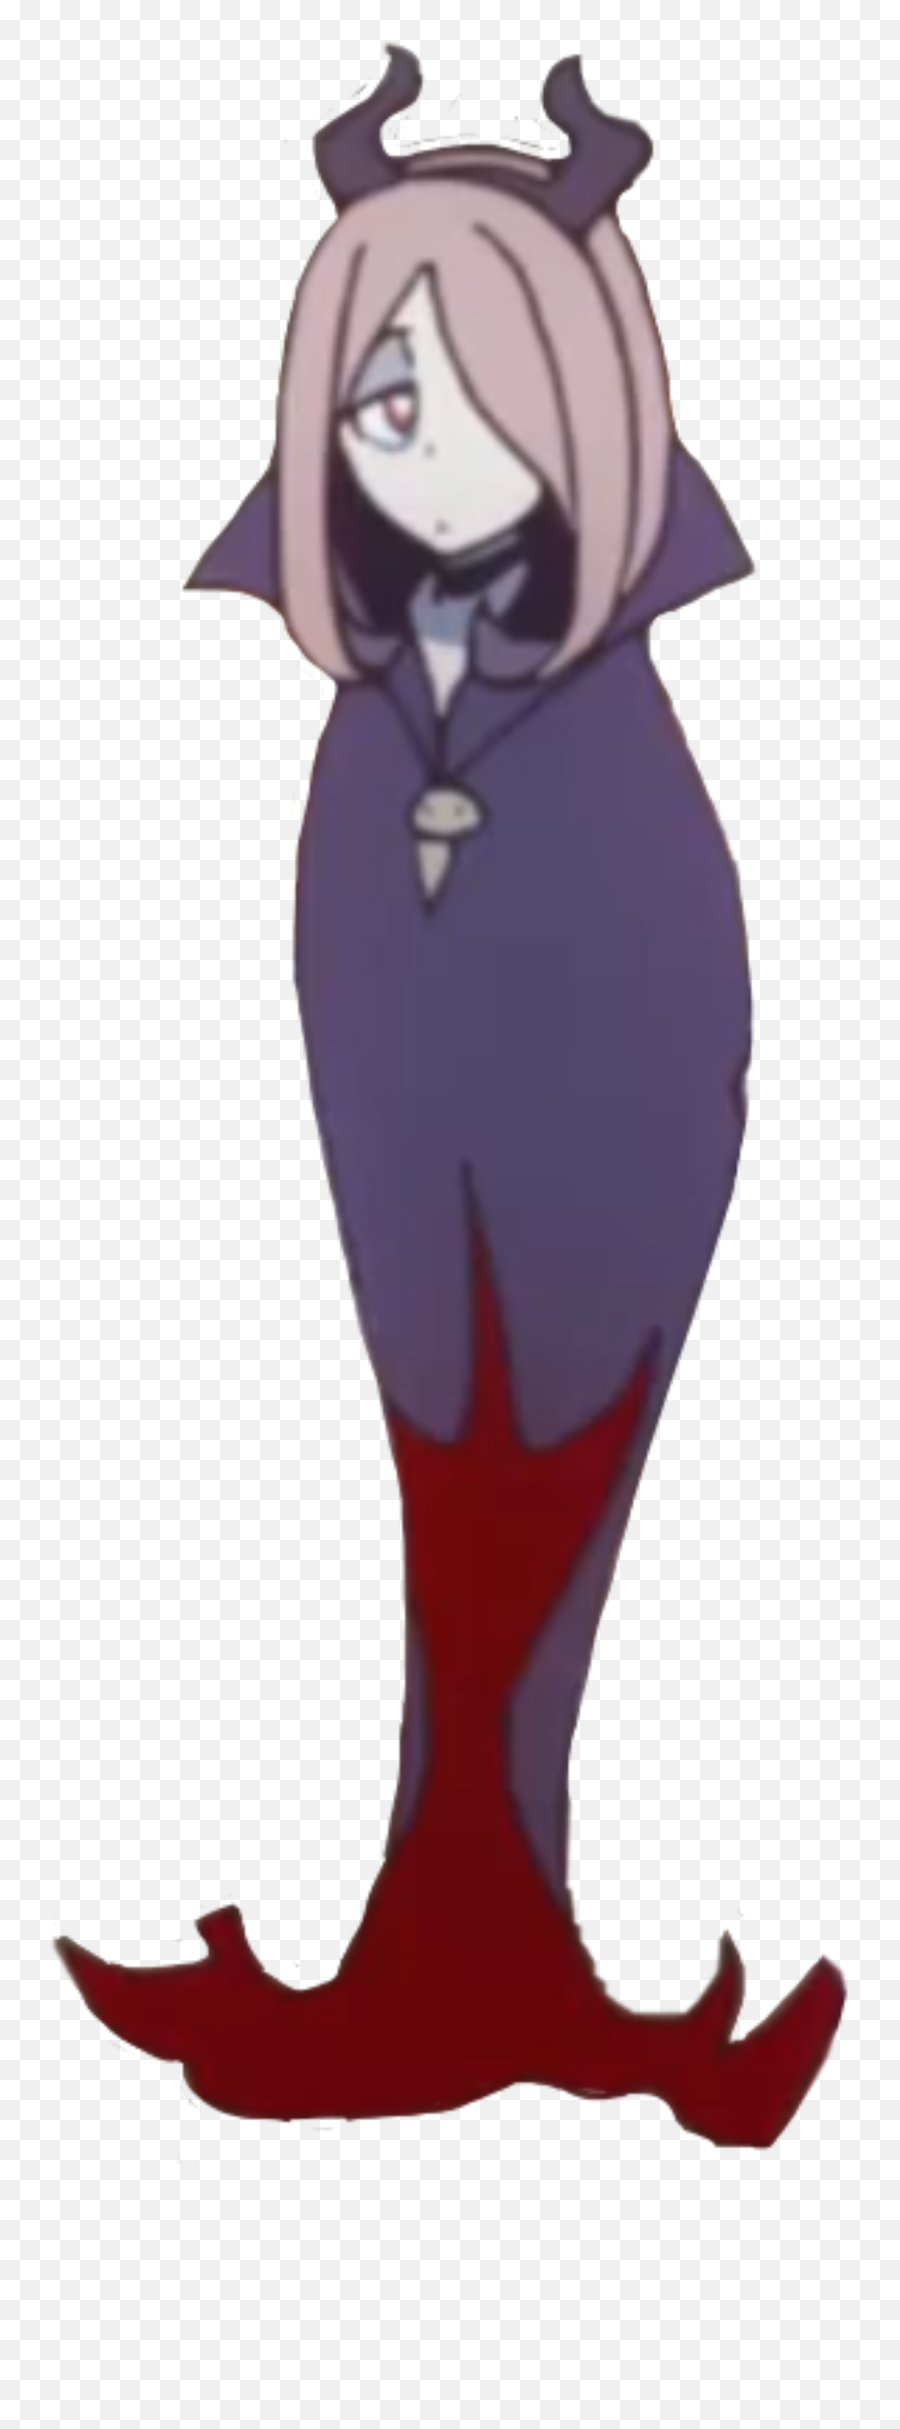 The Most Edited Sucy Picsart Emoji,Little Witch Academia Lotte Emojis